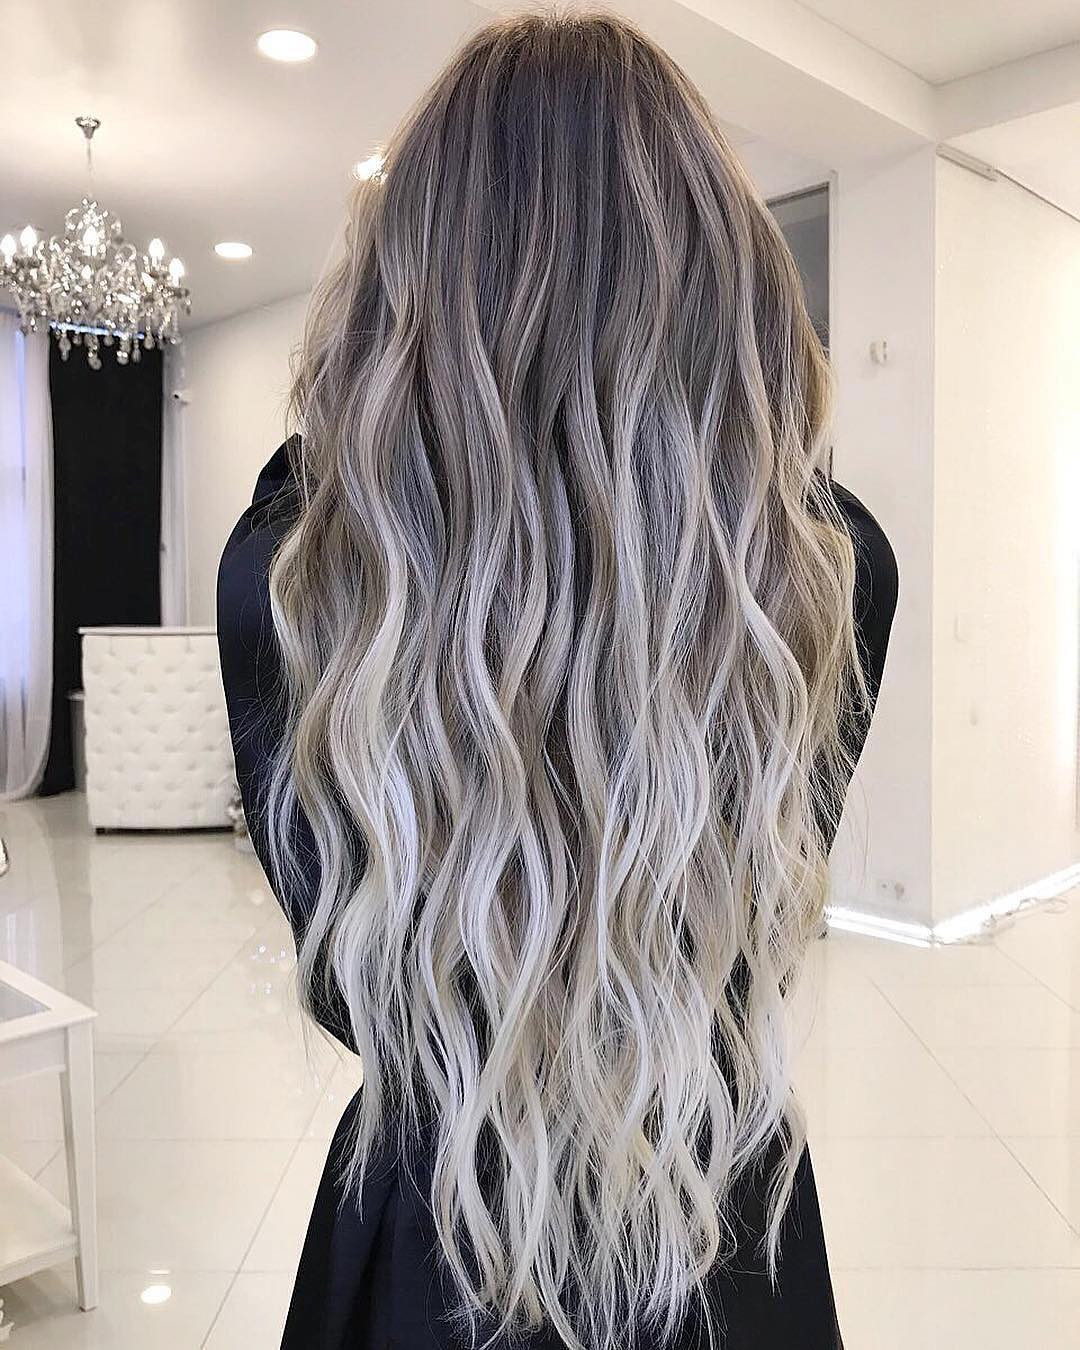 Long Ombre Hairstyles
 10 Balayage Ombre Long Hair Styles from Subtle to Stunning